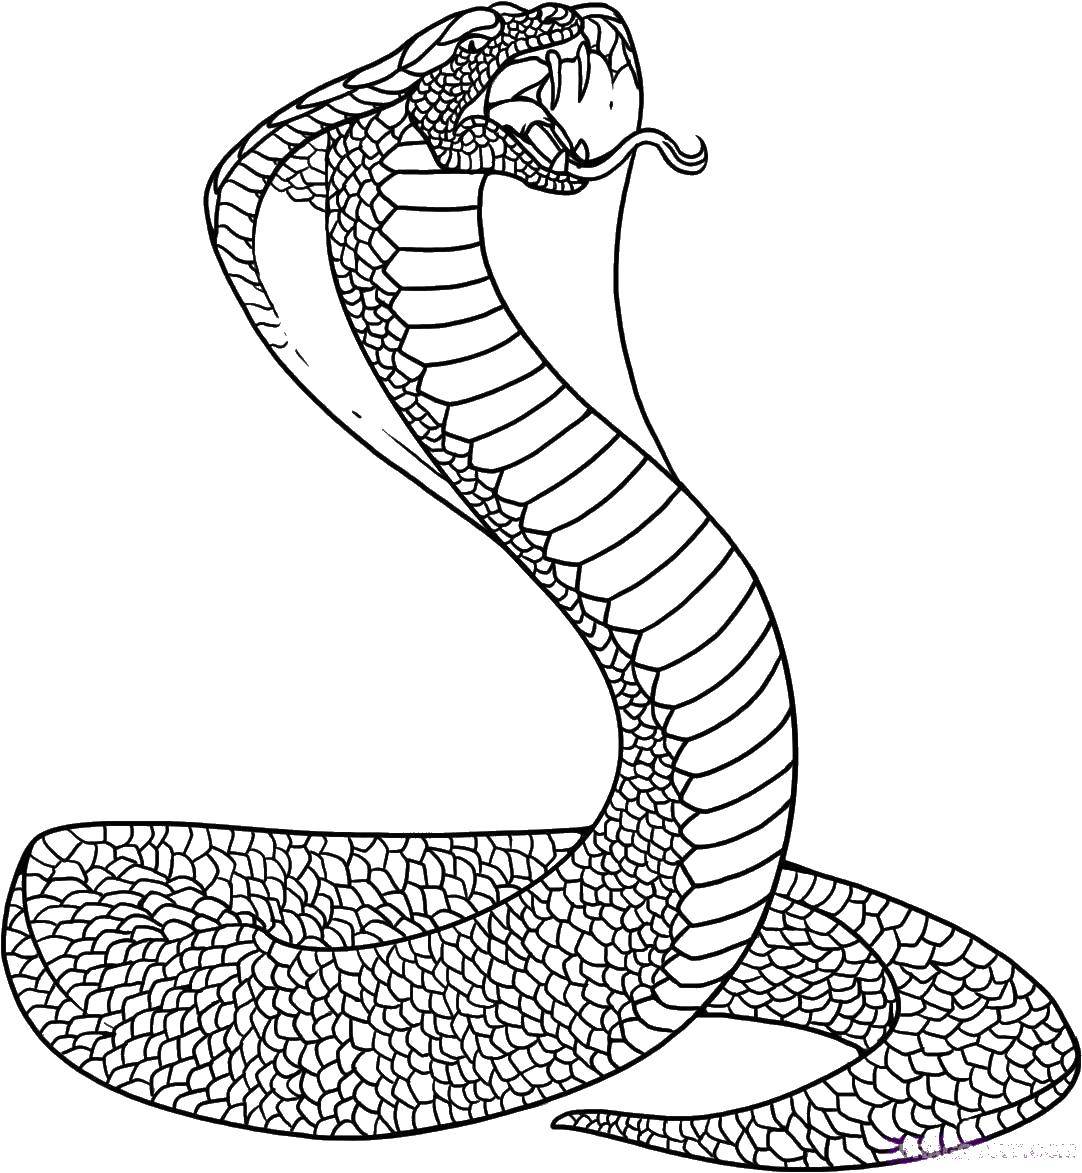 Coloring Huge Cobra. Category The snake. Tags:  Reptile, snake.